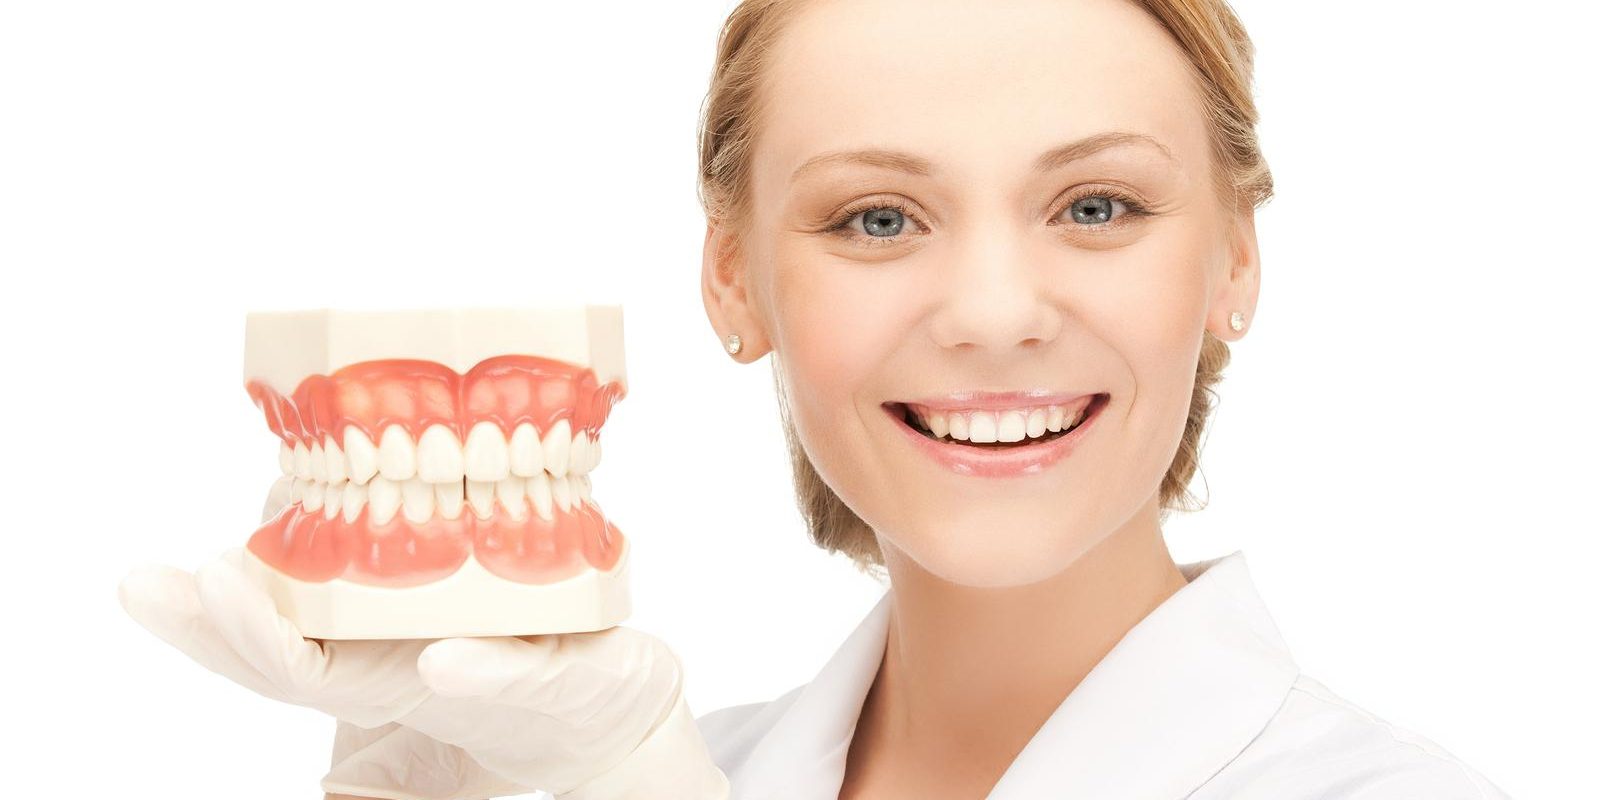 Get Your Smile Back at Melbourne’s Top Denture Clinic!